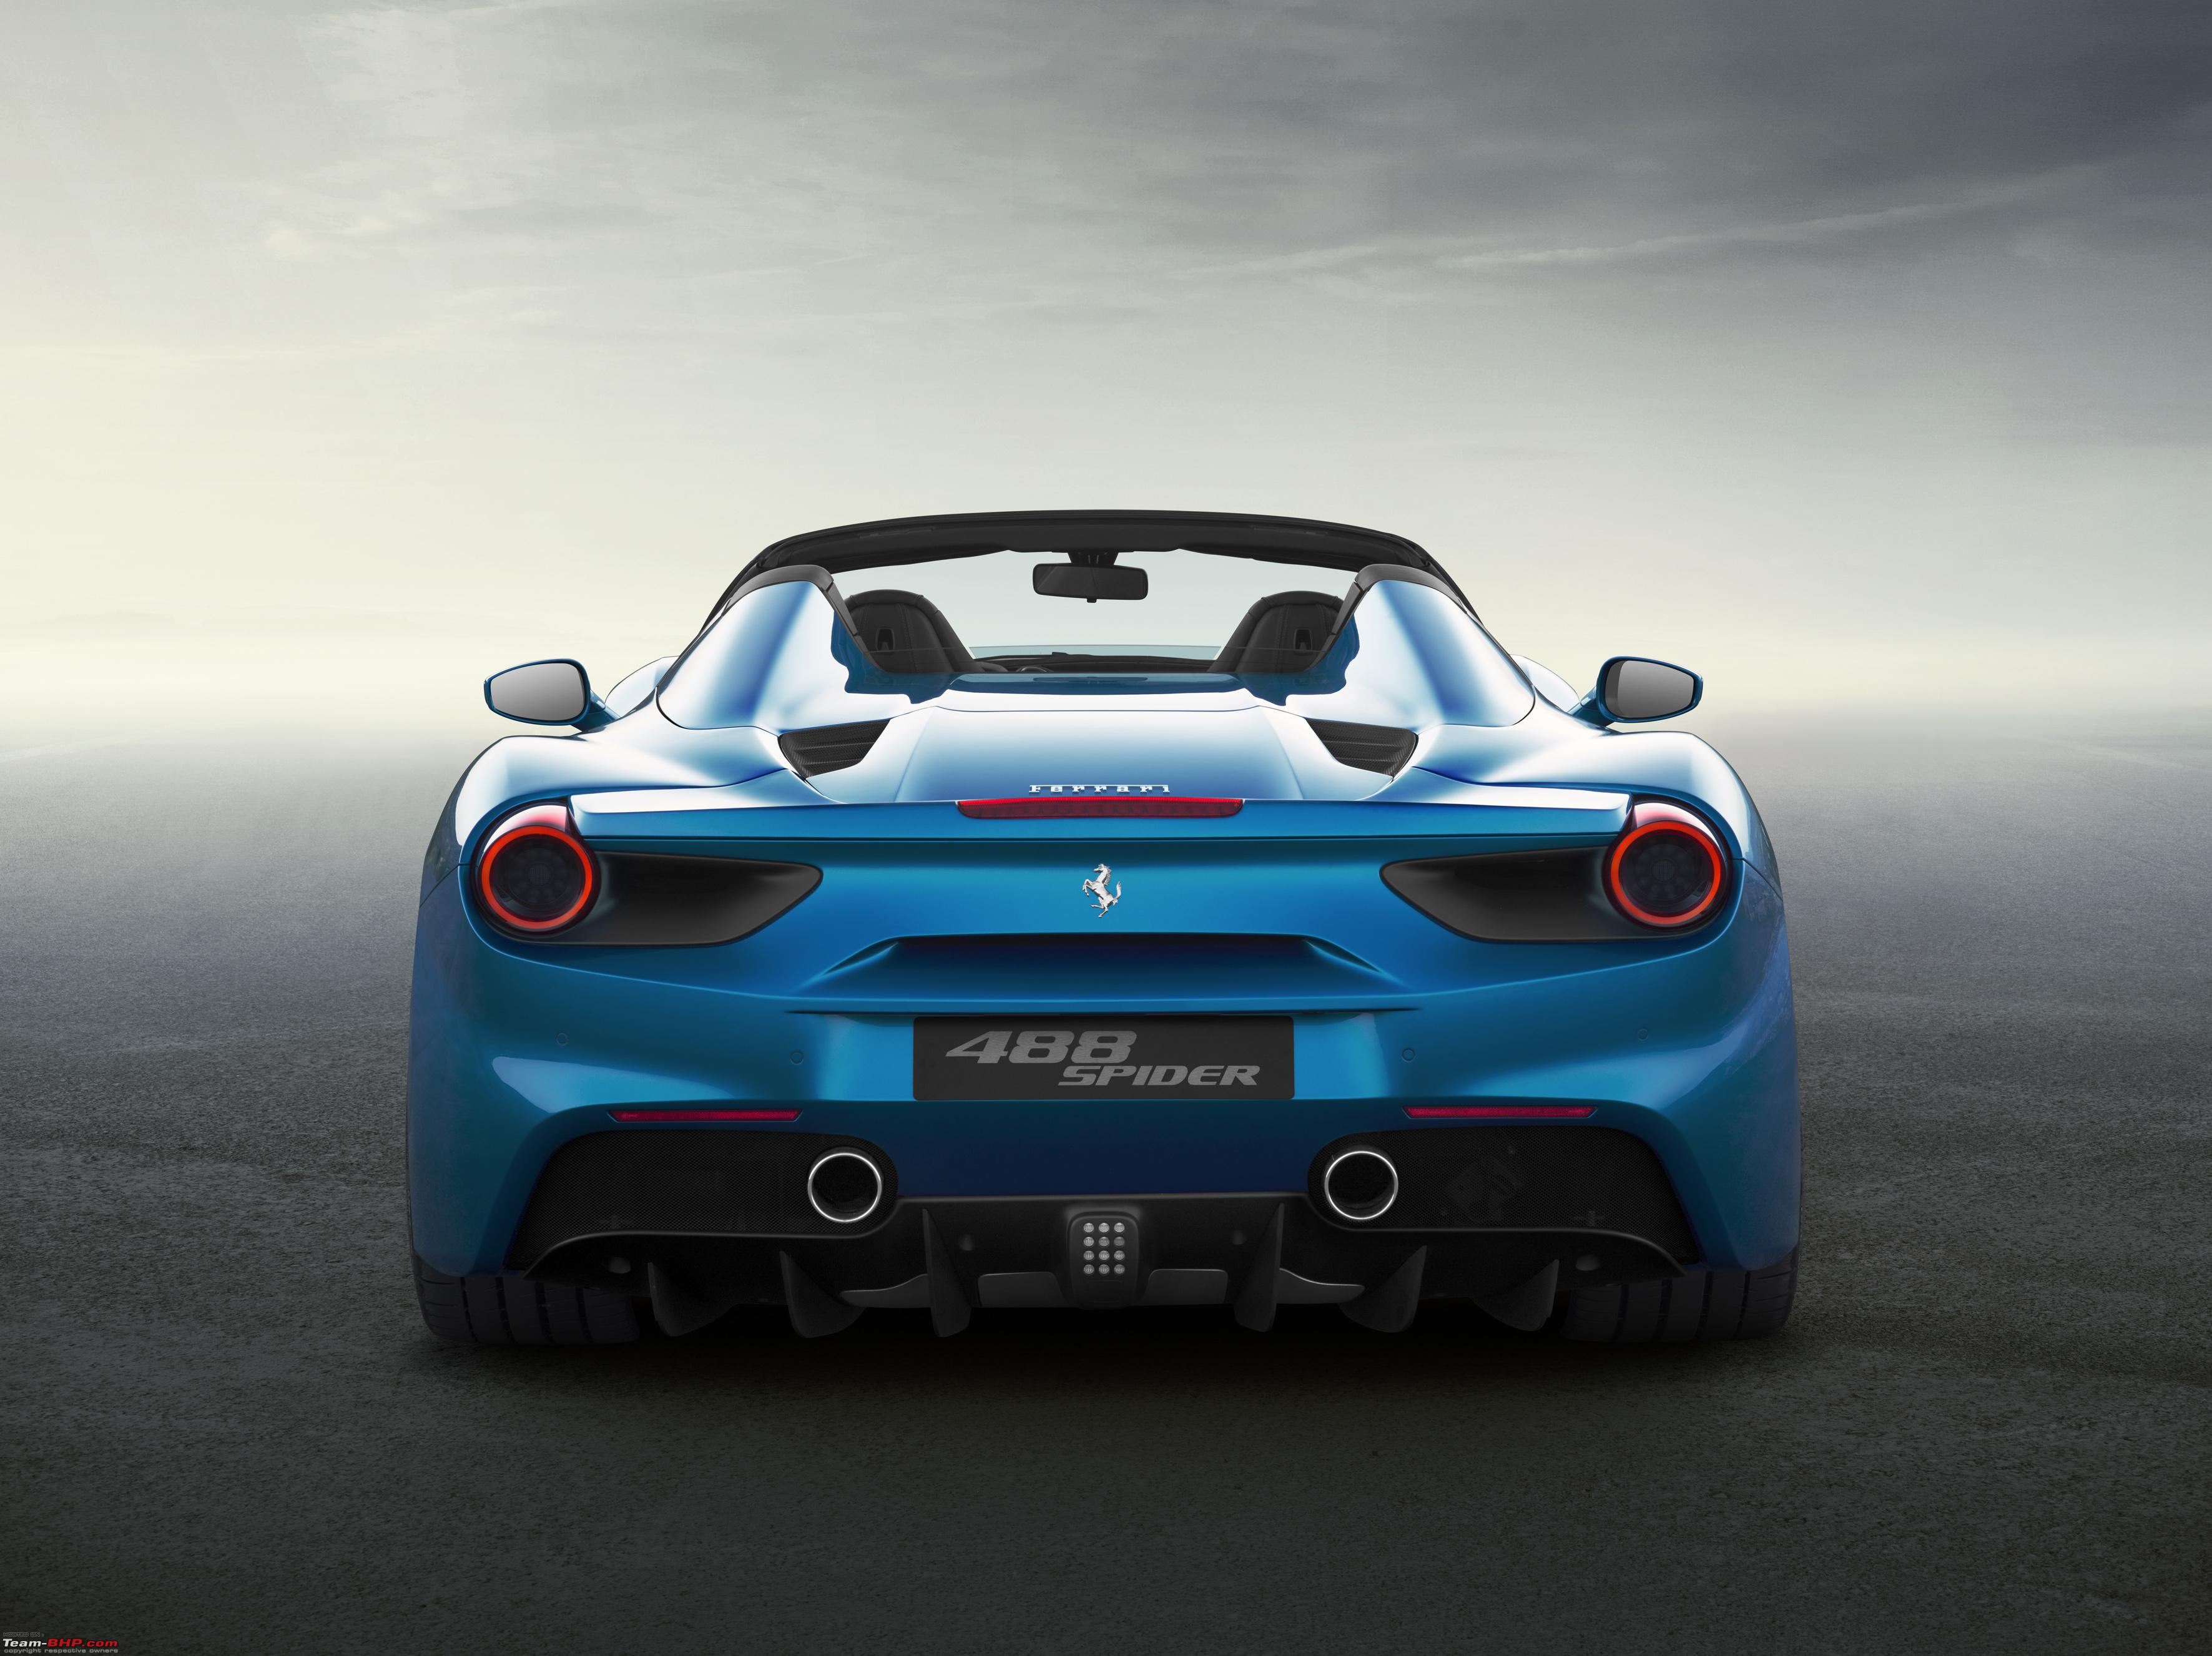 Ferrari 488 Gtb The 458 Replacement With Turbo Page 2